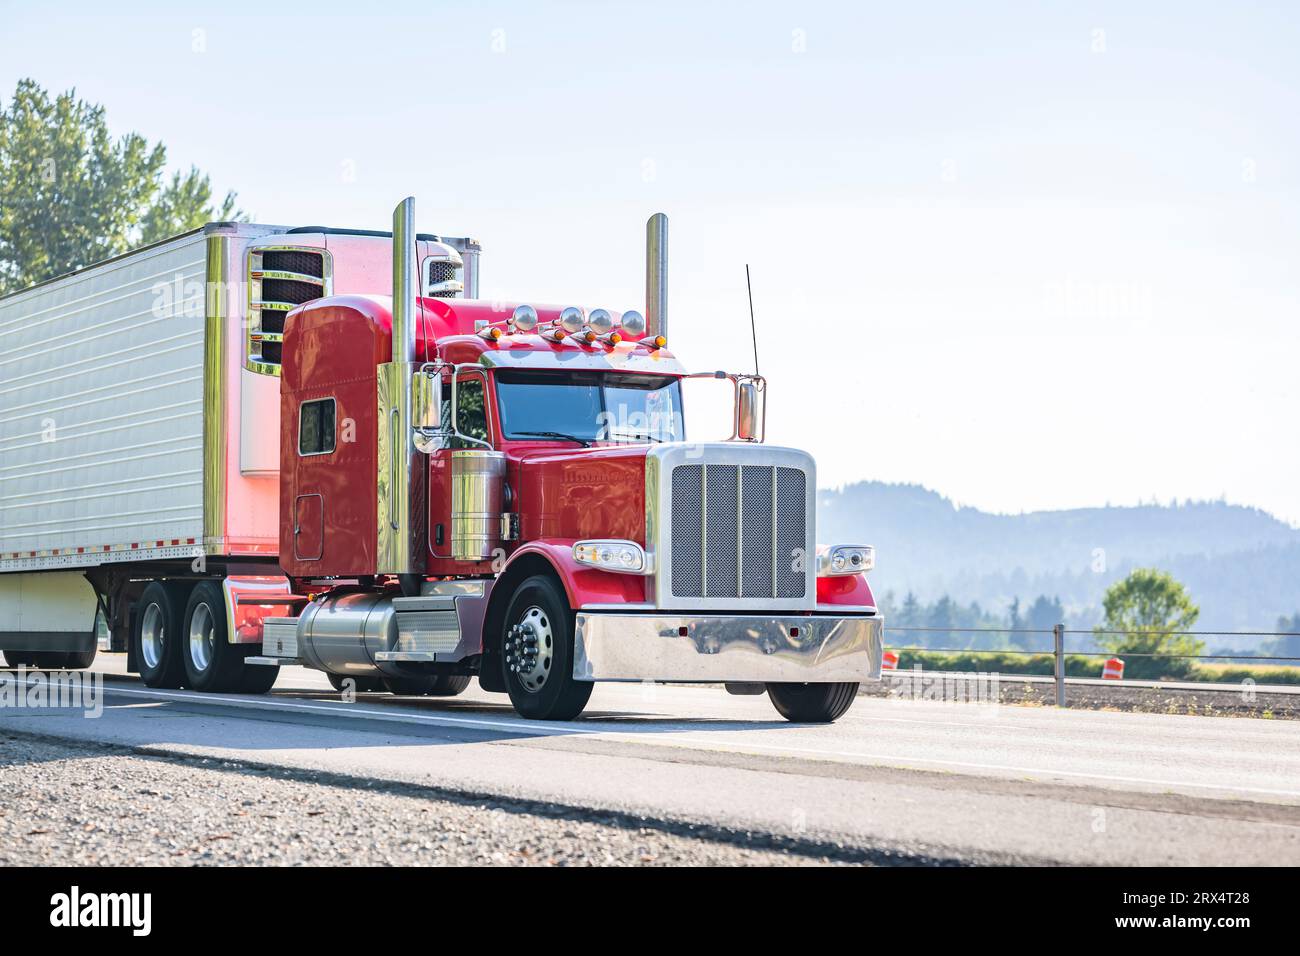 Industrial long hauler carrier red classic big rig semi truck tractor with extended cab for truck driver rest  transporting cargo in refrigerator semi Stock Photo